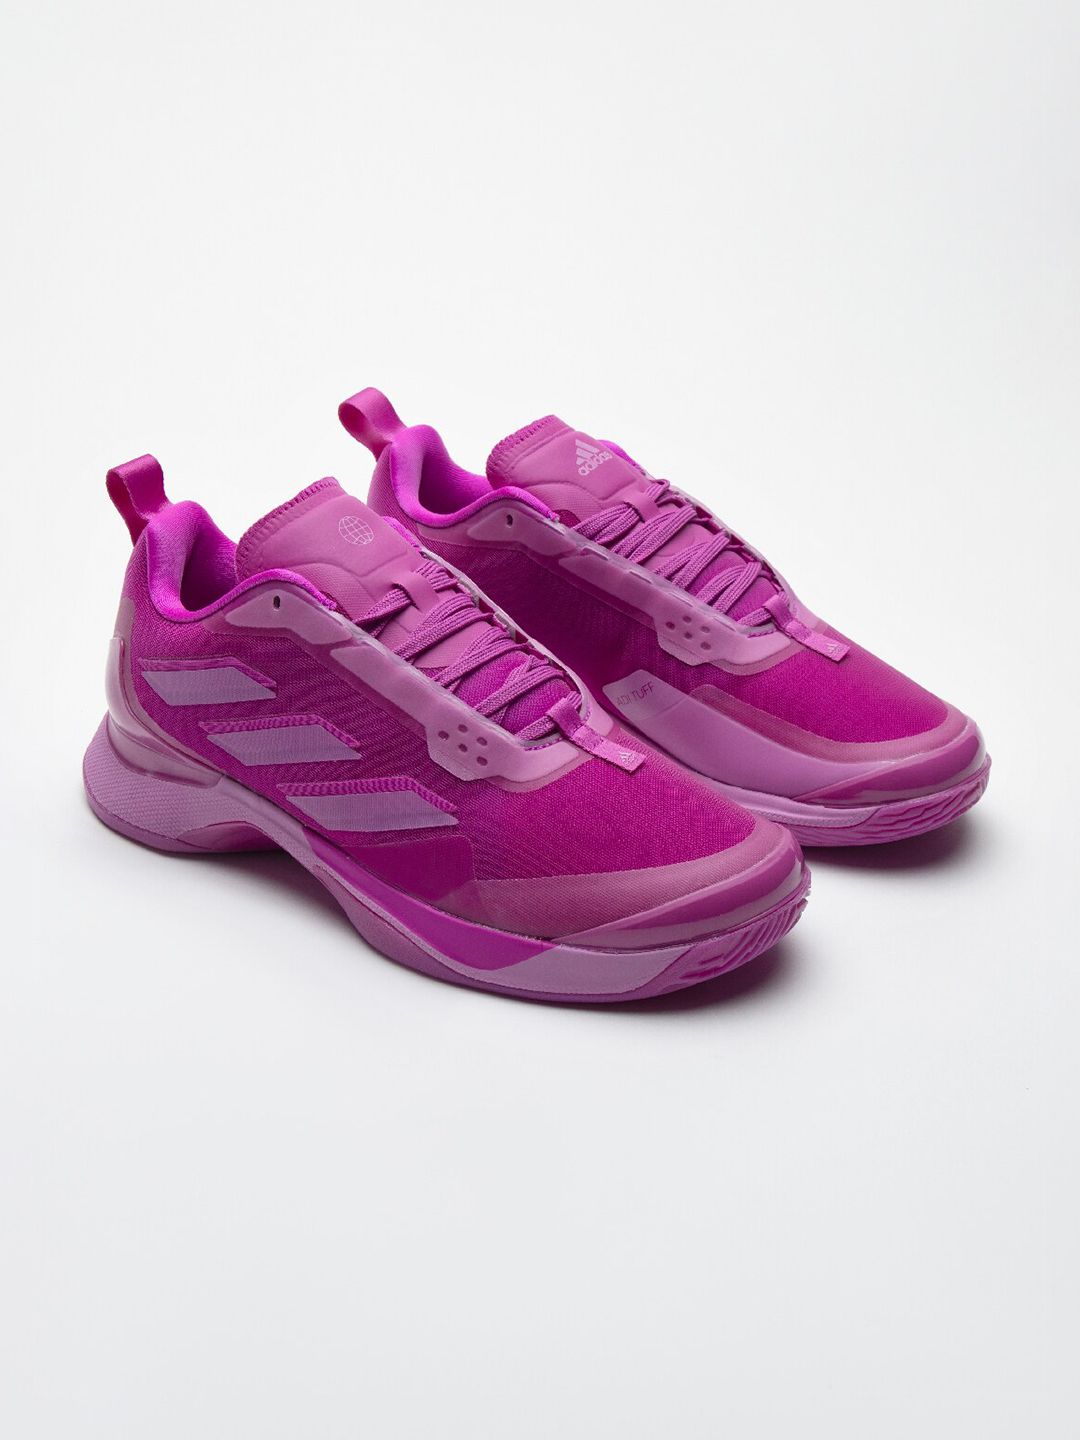 ADIDAS Women Pink Tennis Non-Marking Shoes Price in India